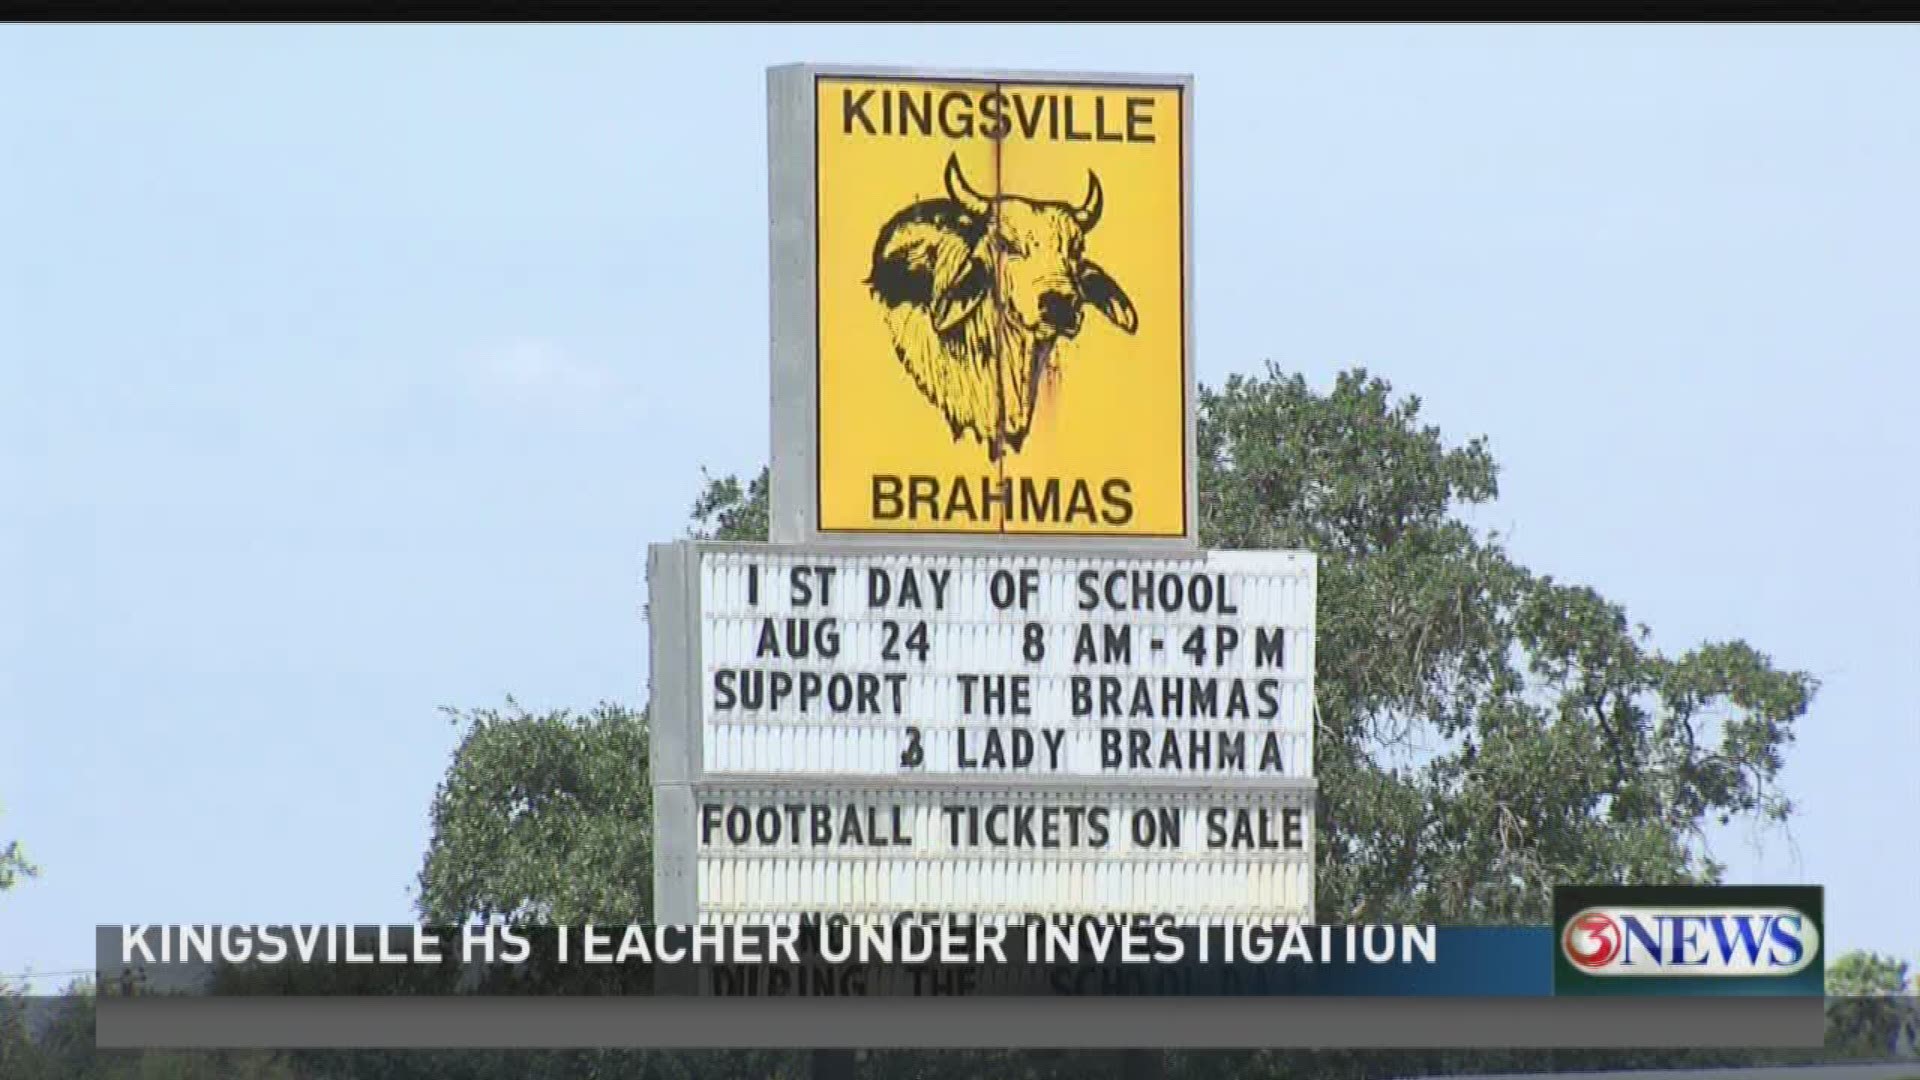 An H.M. King High School teacher is under investigation by the Kingsville Independent School District due to allegations of inappropriate conduct between a teacher and students involving alcohol.